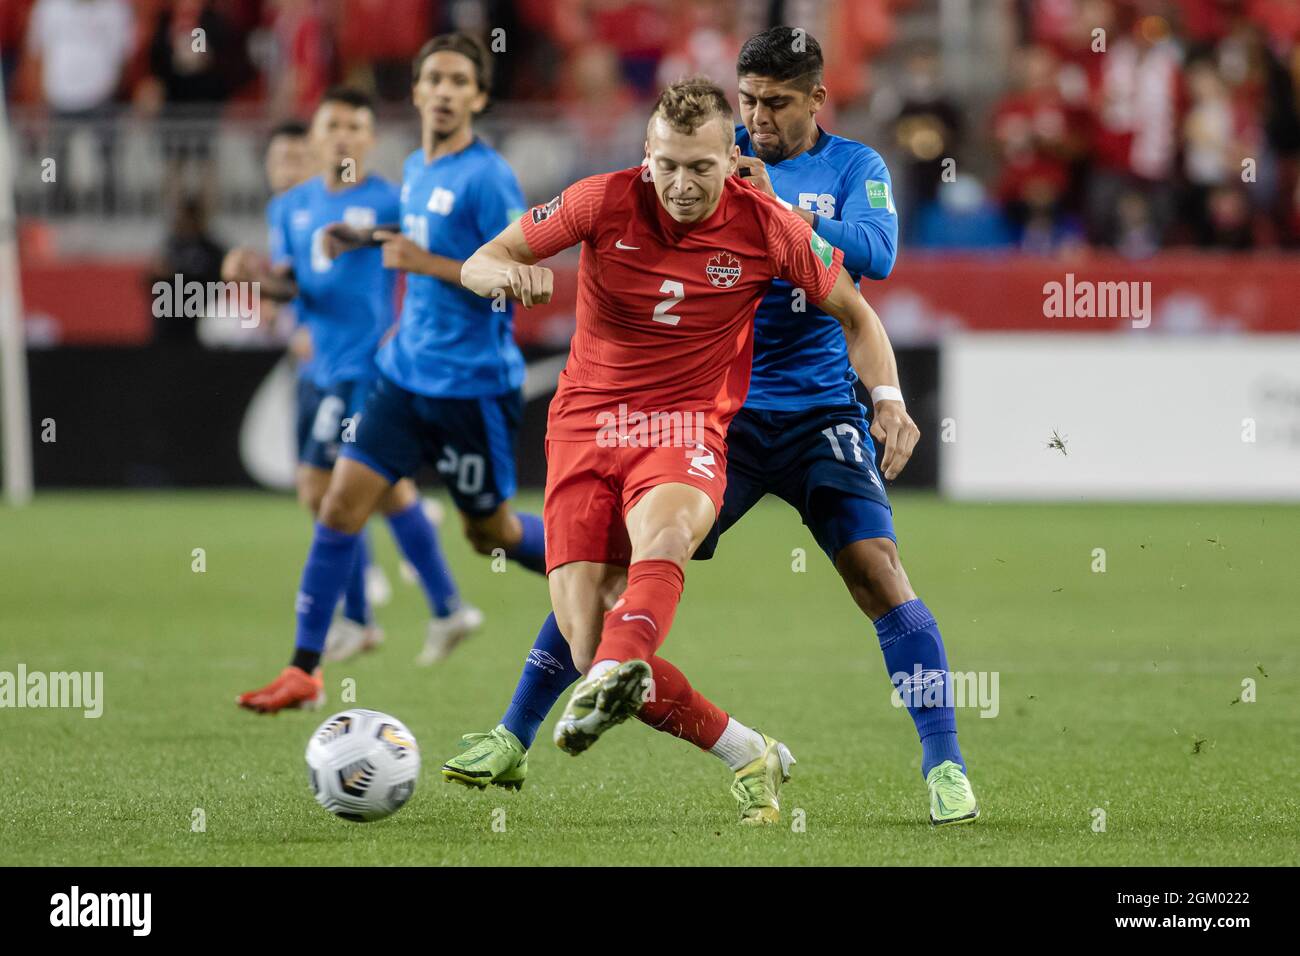 Toronto, Canada, September 8, 2021: Alistair Johnston (No.2) of Team Canada compete for the ball against Jairo Henríquez (No.17) of Team El Salvador during the CONCACAF FIFA World Cup Qualifying 2022 match at BMO Field in Toronto, Canada. Canada won the match 3-0. Stock Photo